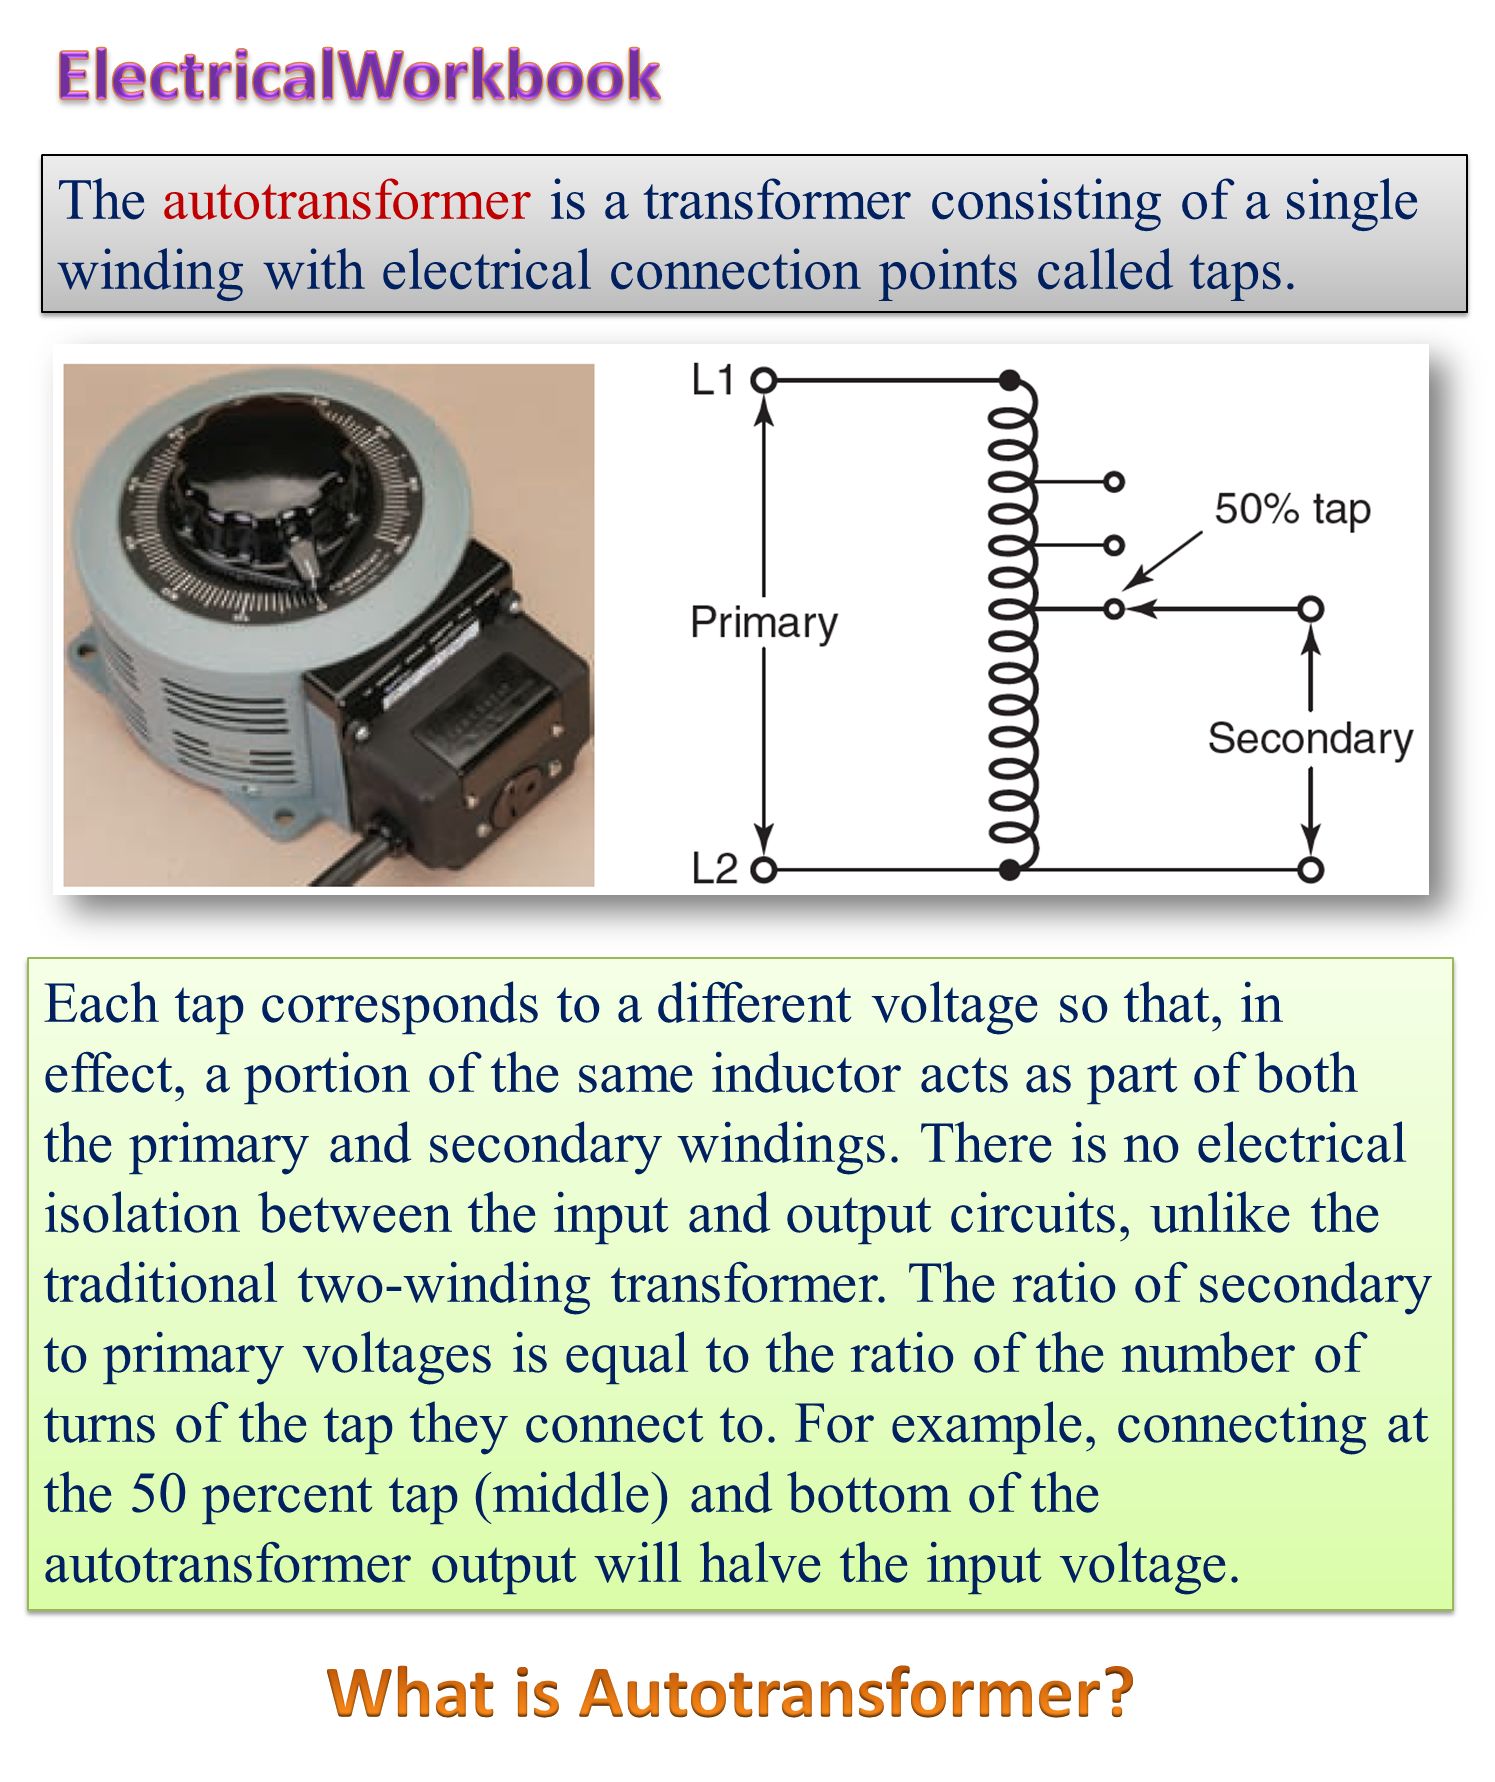 What is an Auto transformer